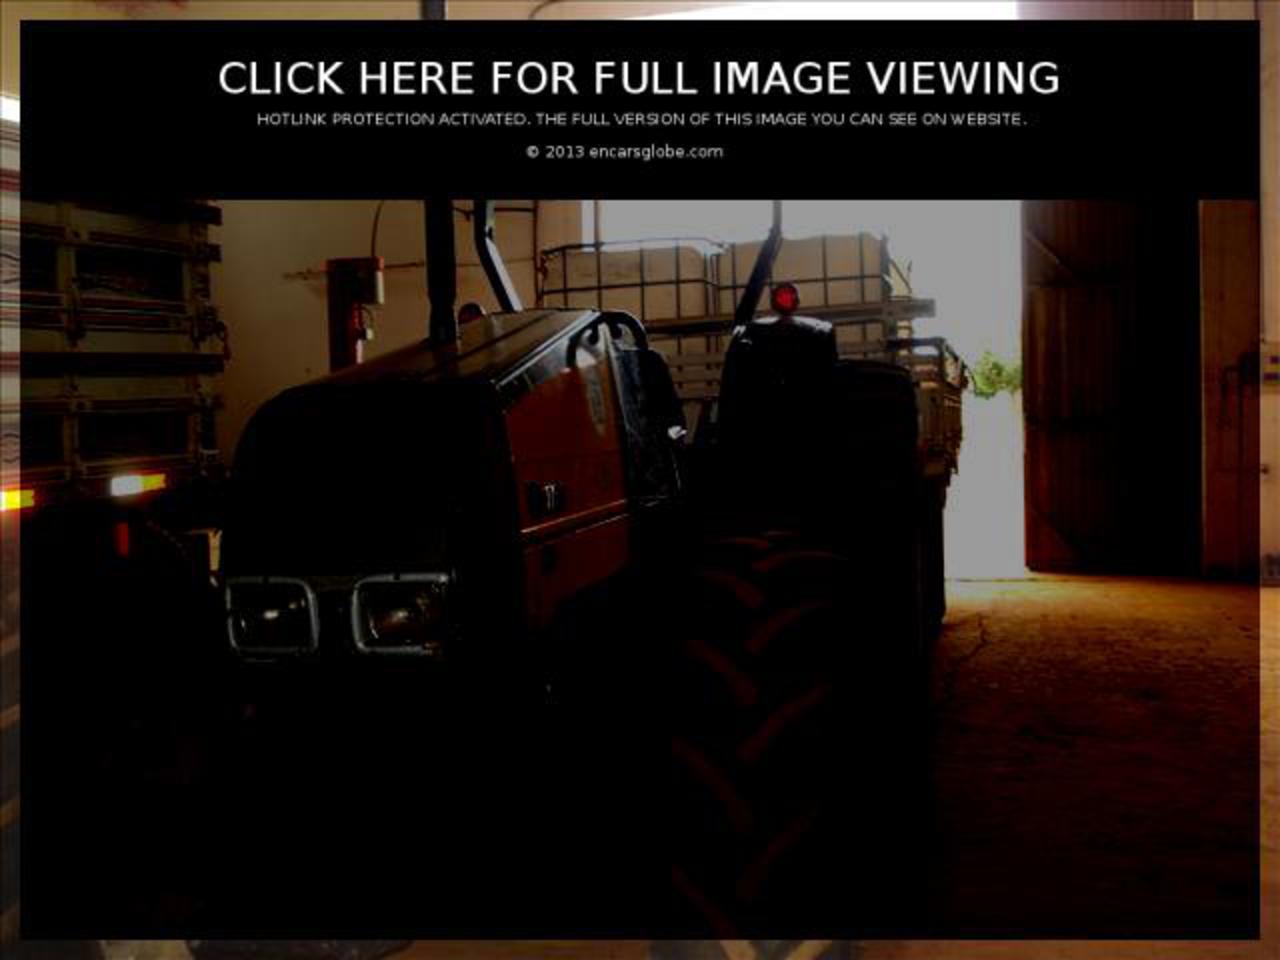 Valtra BL-88 Photo Gallery: Photo #07 out of 12, Image Size - 640 ...